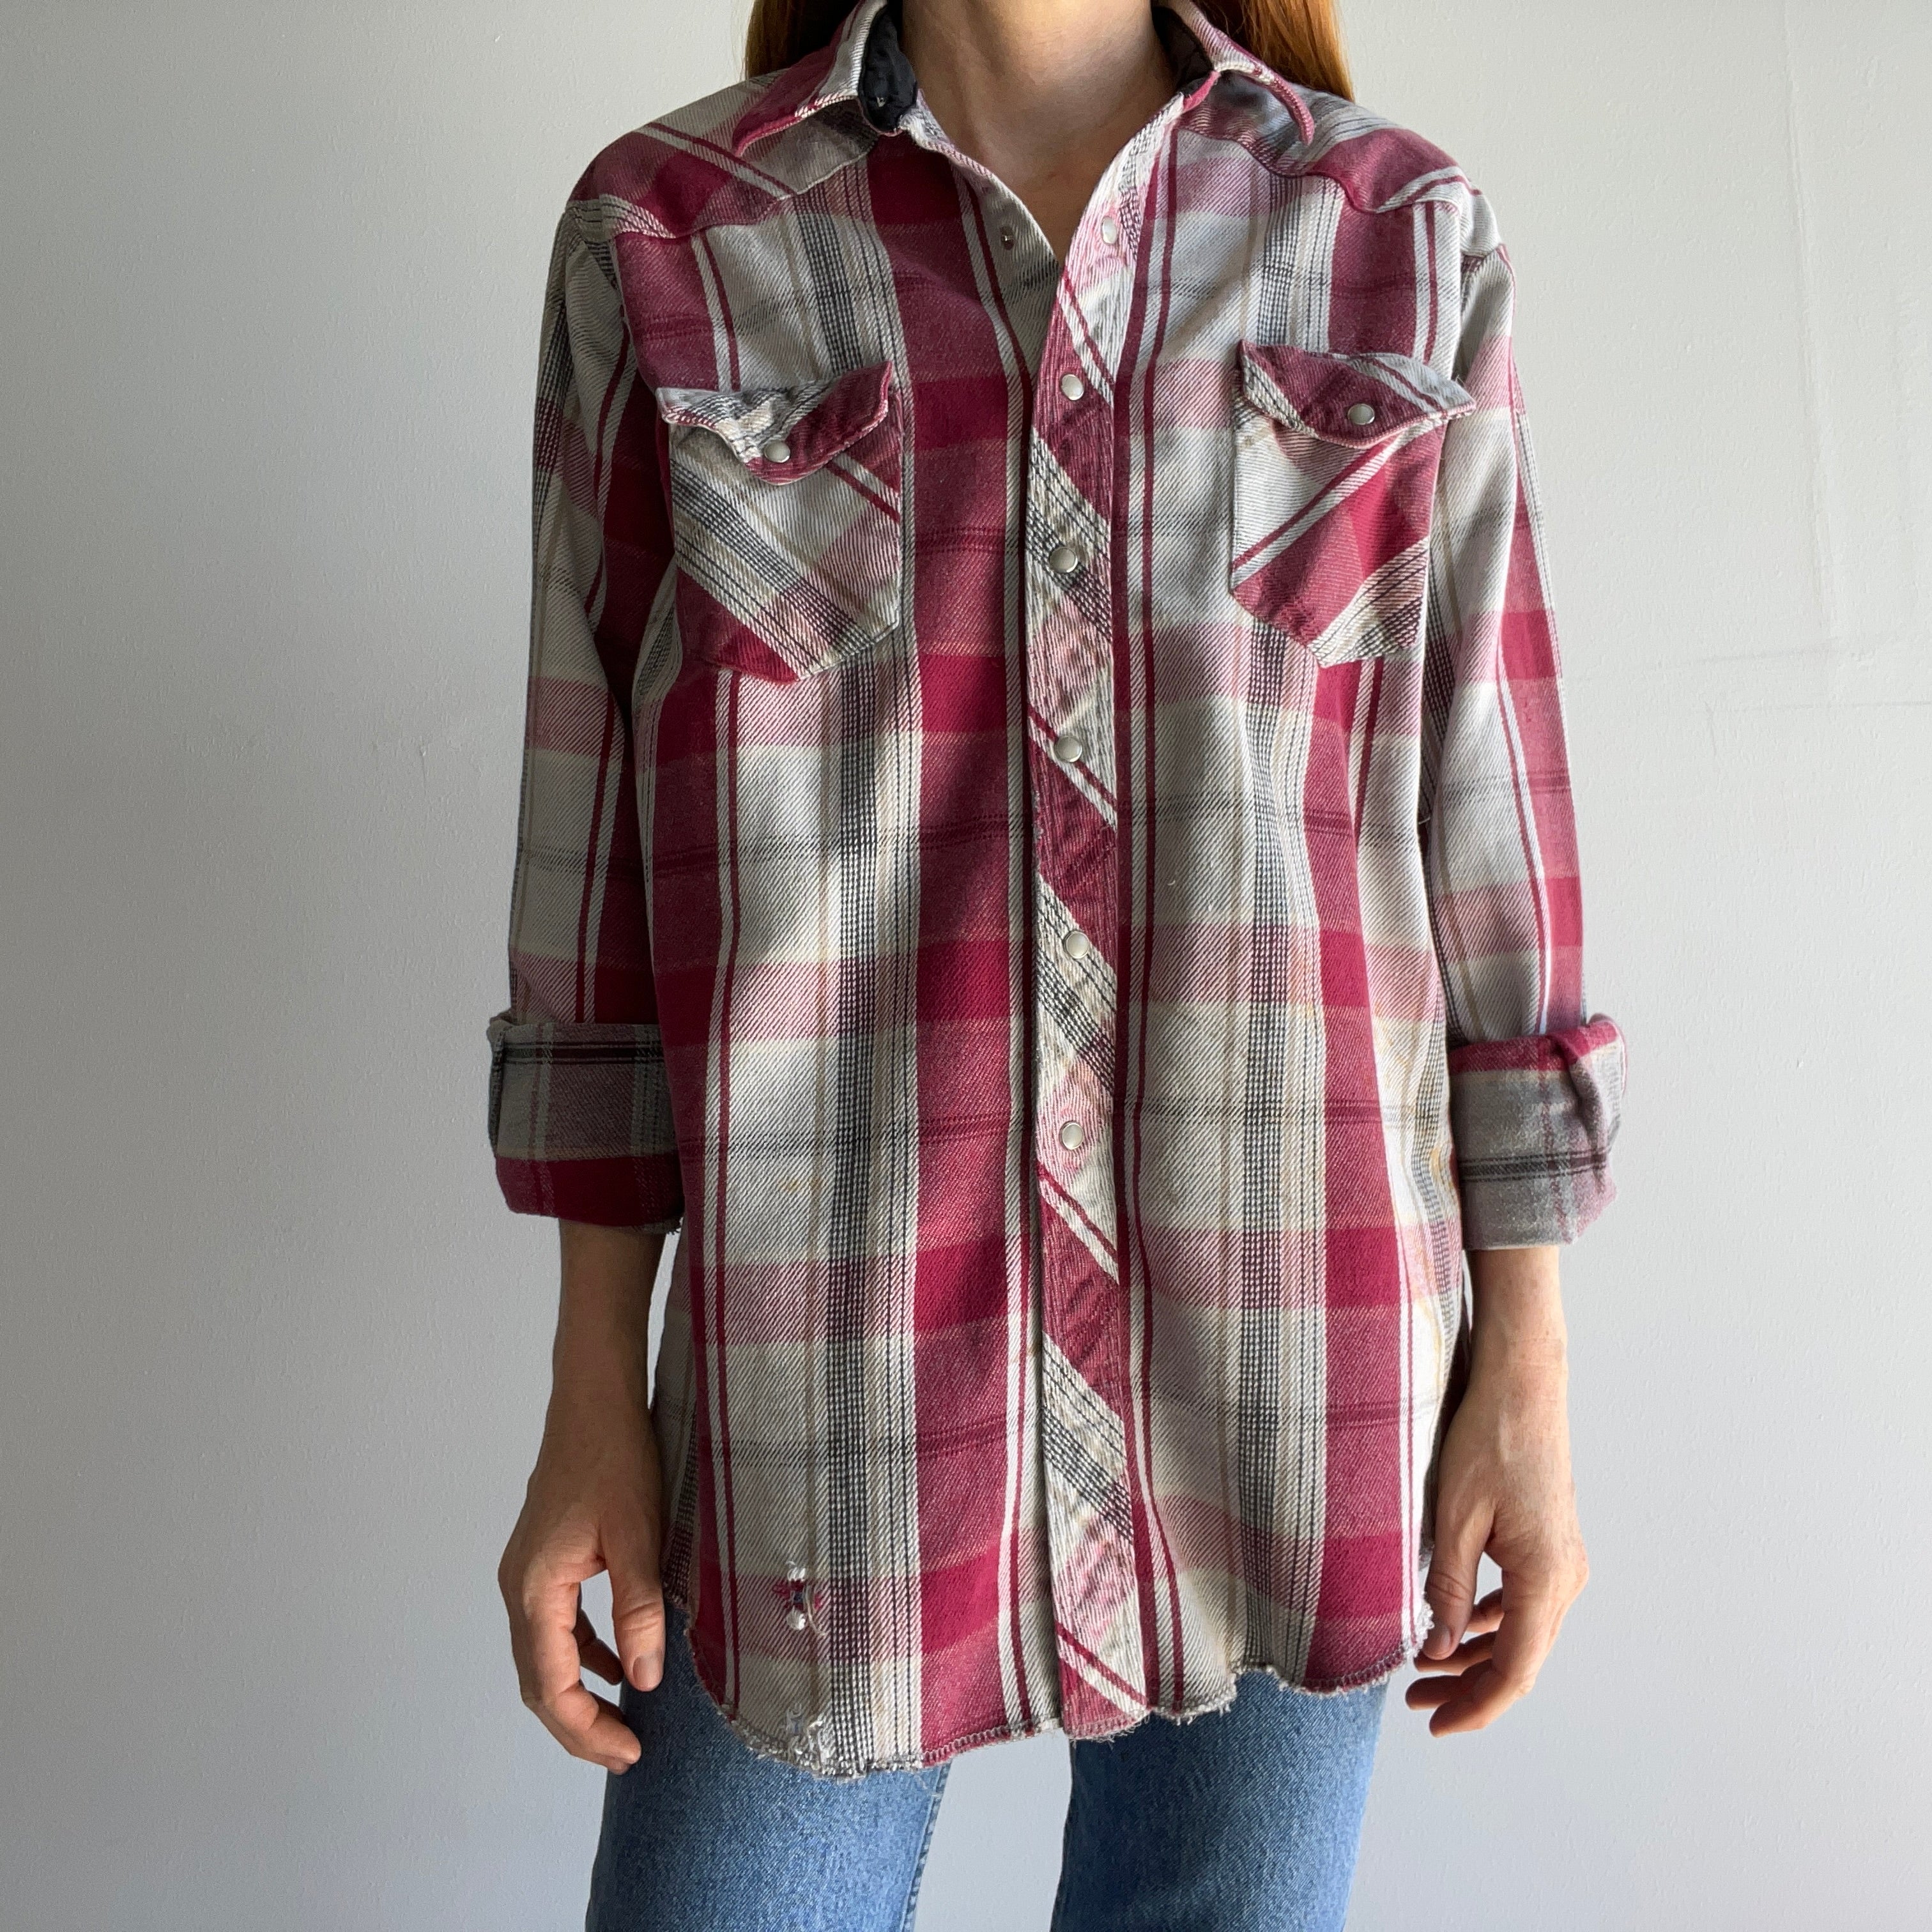 1990s Nicely Worn and Stained Heavyweight Cotton Wrangler Cowboy Flannel